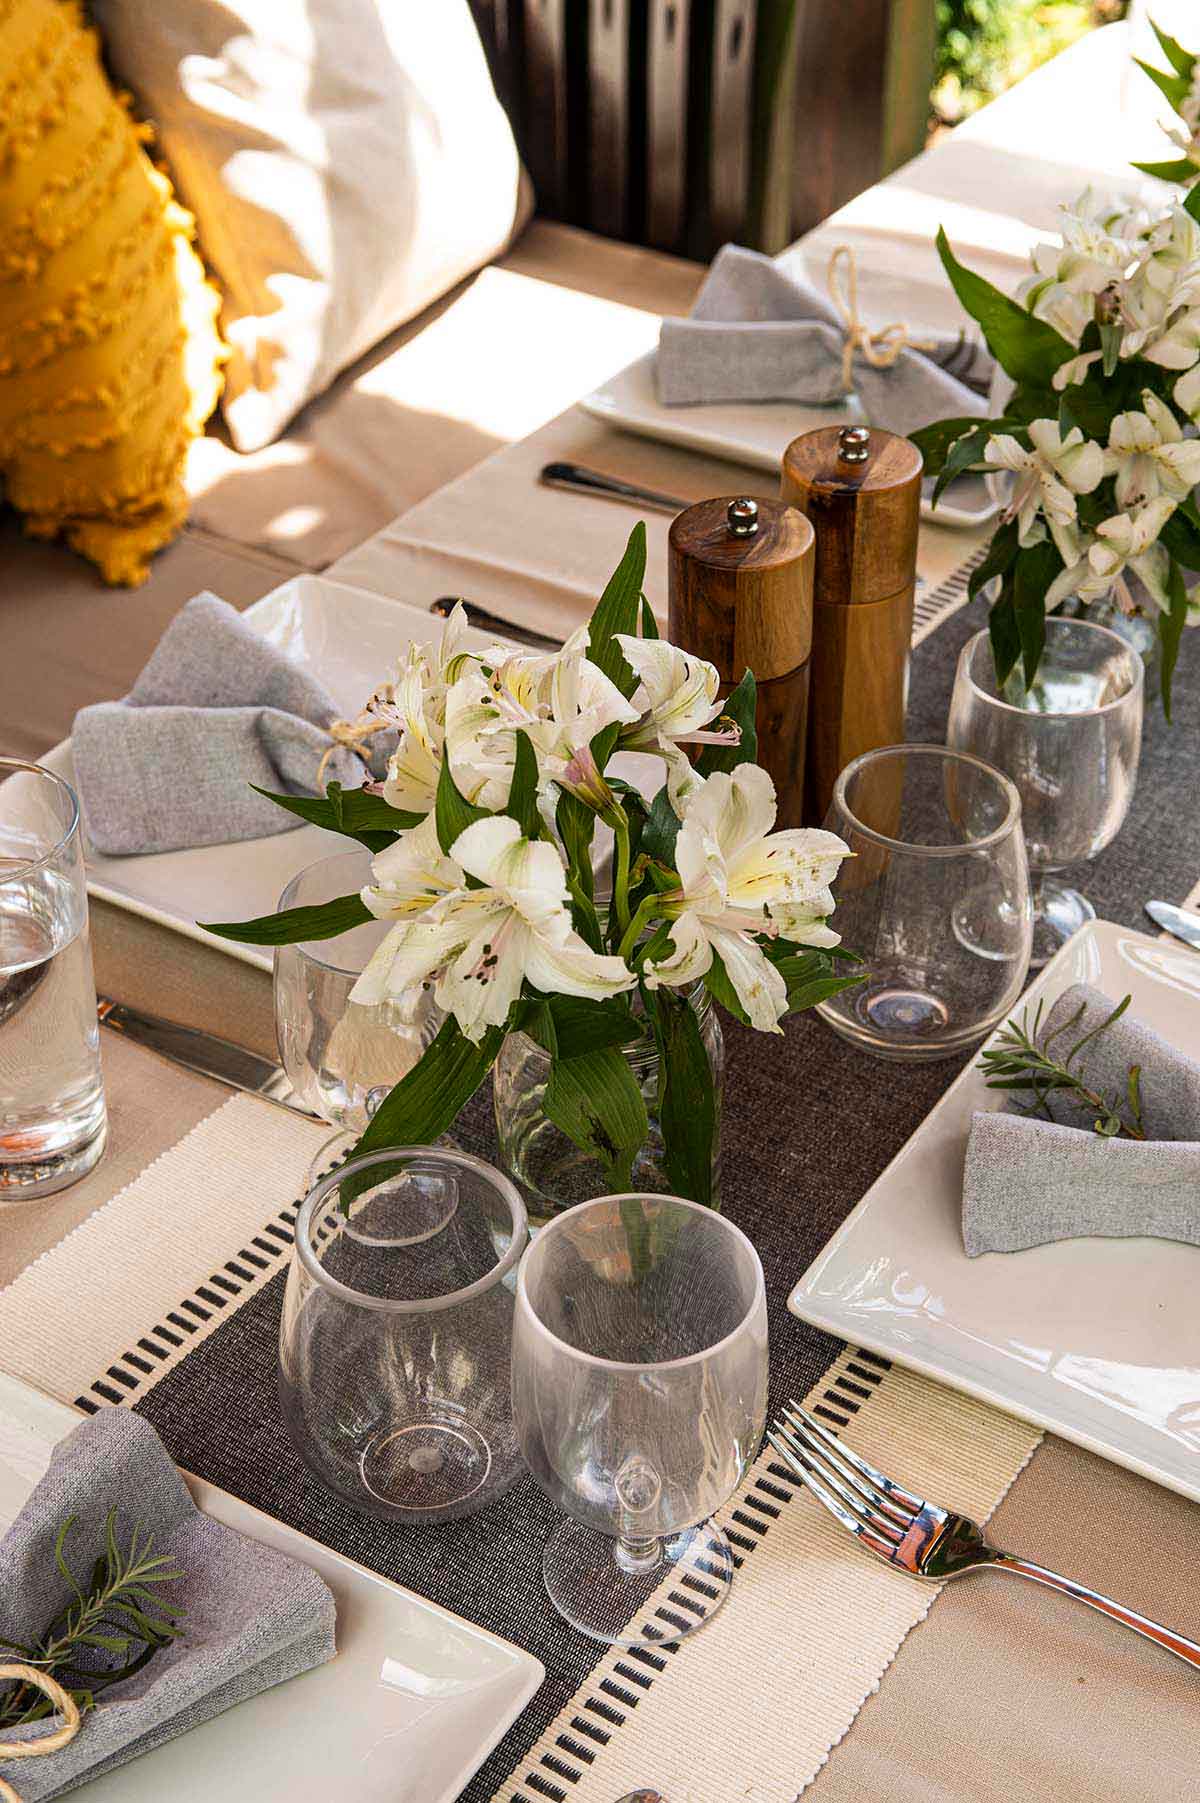 A table set with plates, cups, silverware and flowers.